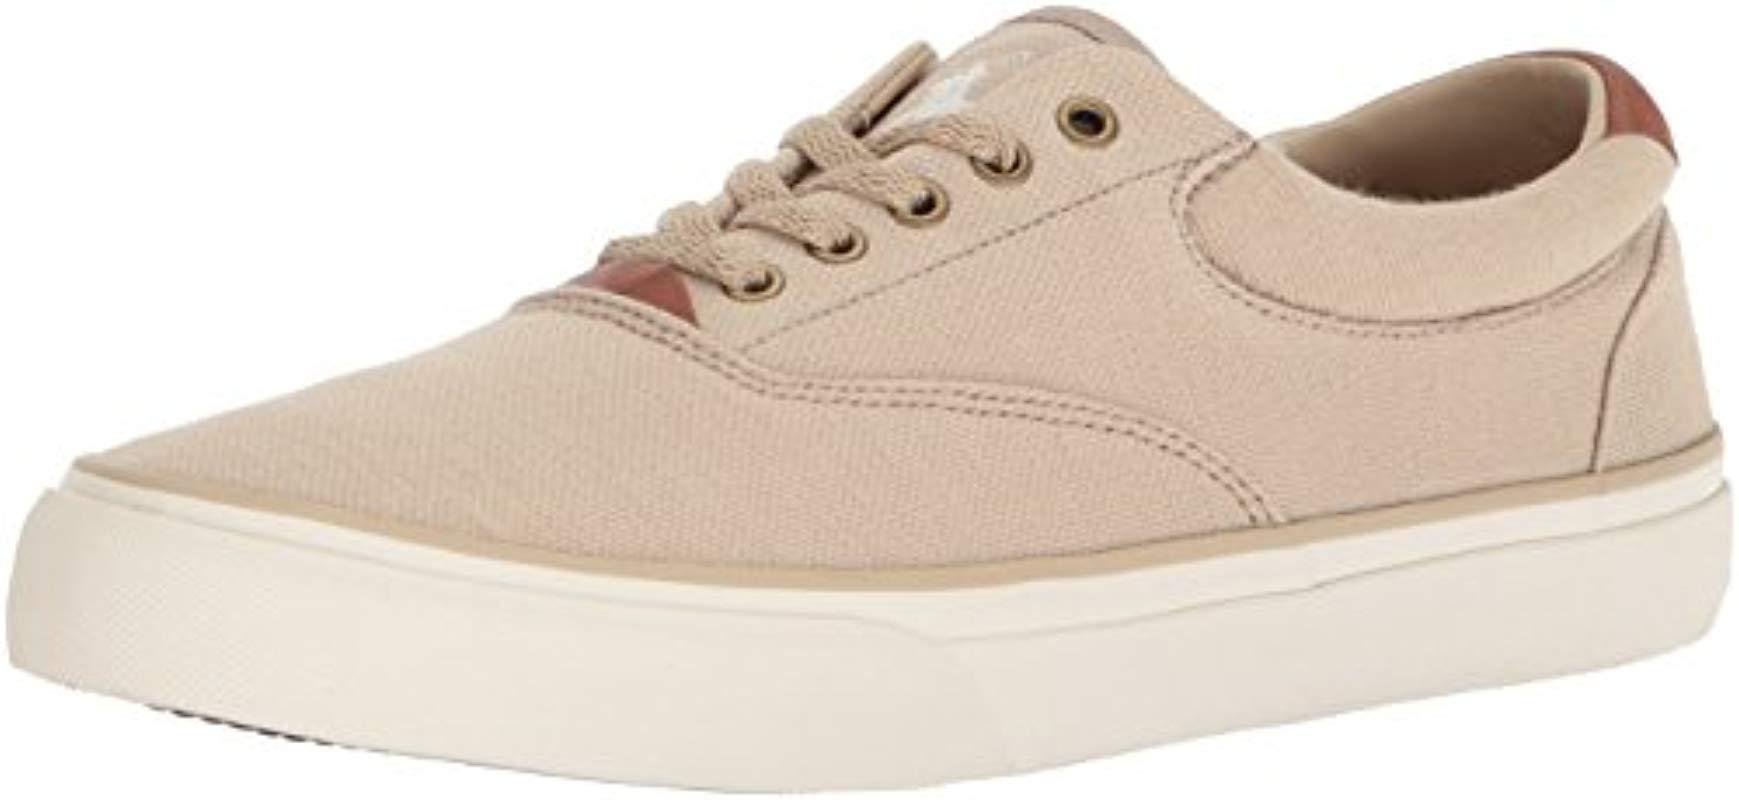 Polo Ralph Lauren Thorton Ii Sneaker in Natural for Men - Save 42% - Lyst